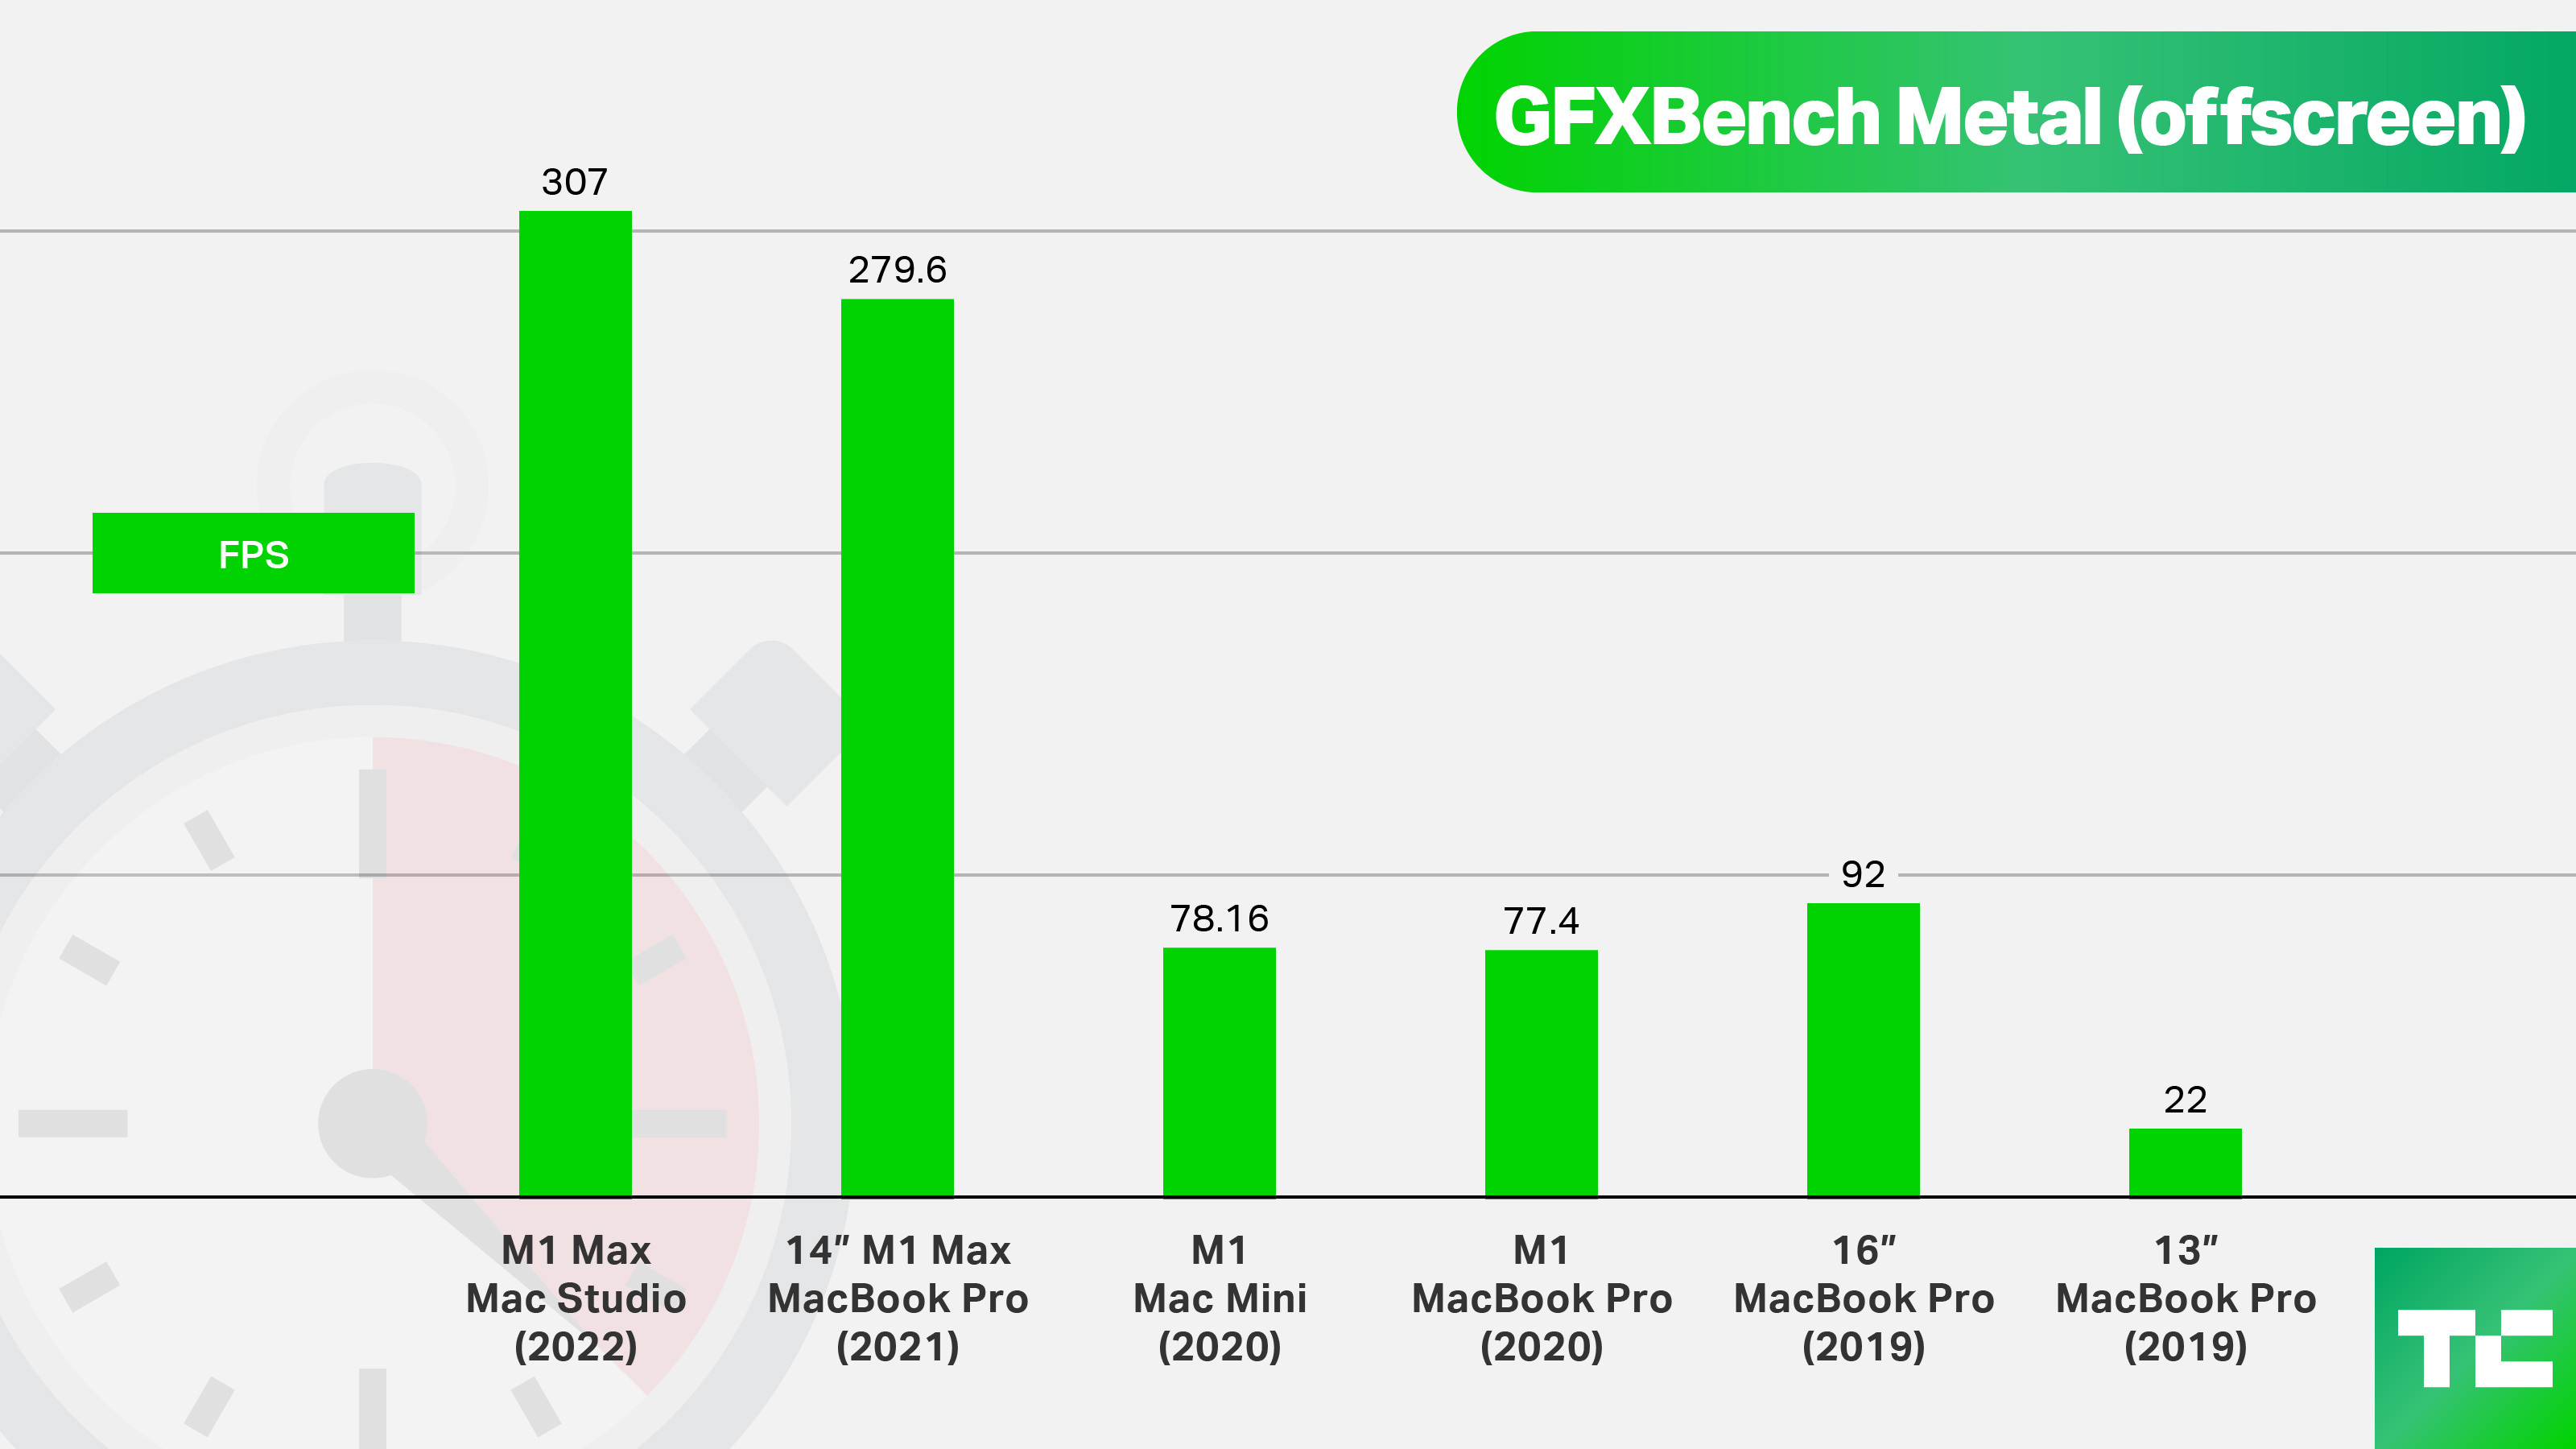 M1 Max Mac Studio 2022 comparing GFXBench Metal (offscreen) to past Apple Mac products